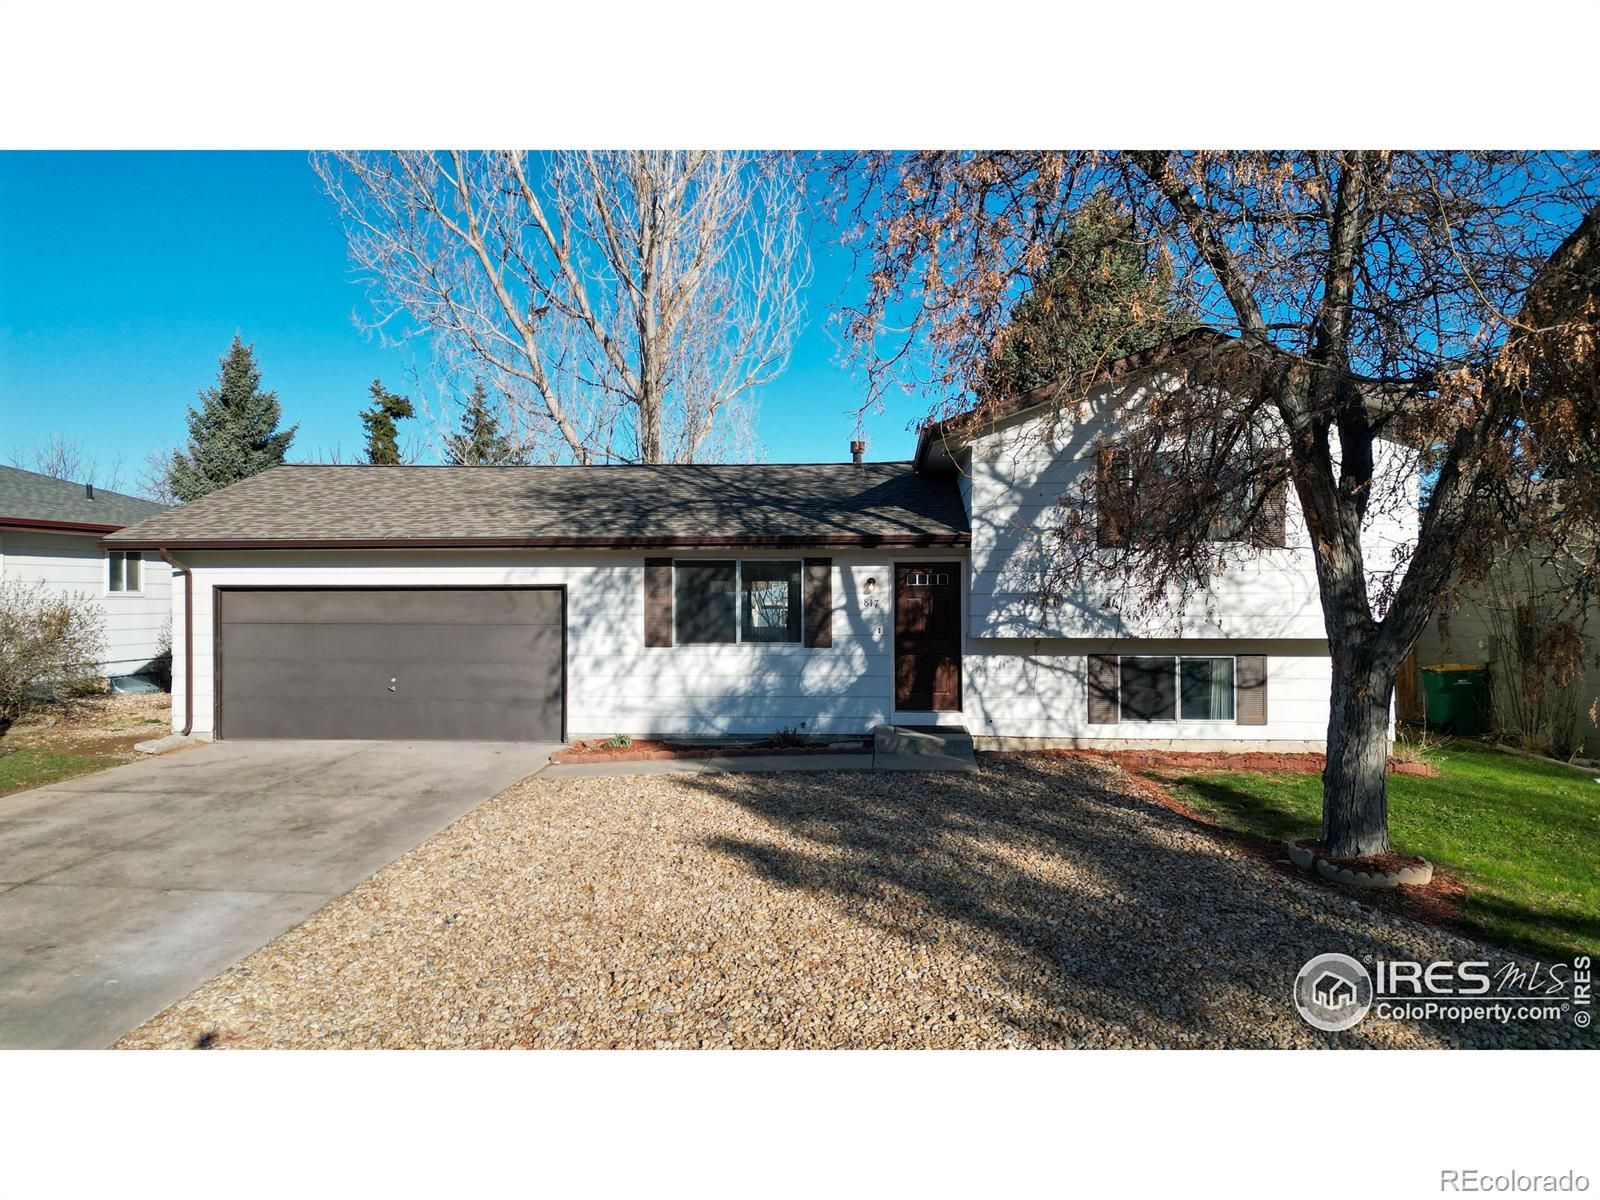 817  44th Avenue, greeley MLS: 4567891006473 Beds: 3 Baths: 2 Price: $370,000